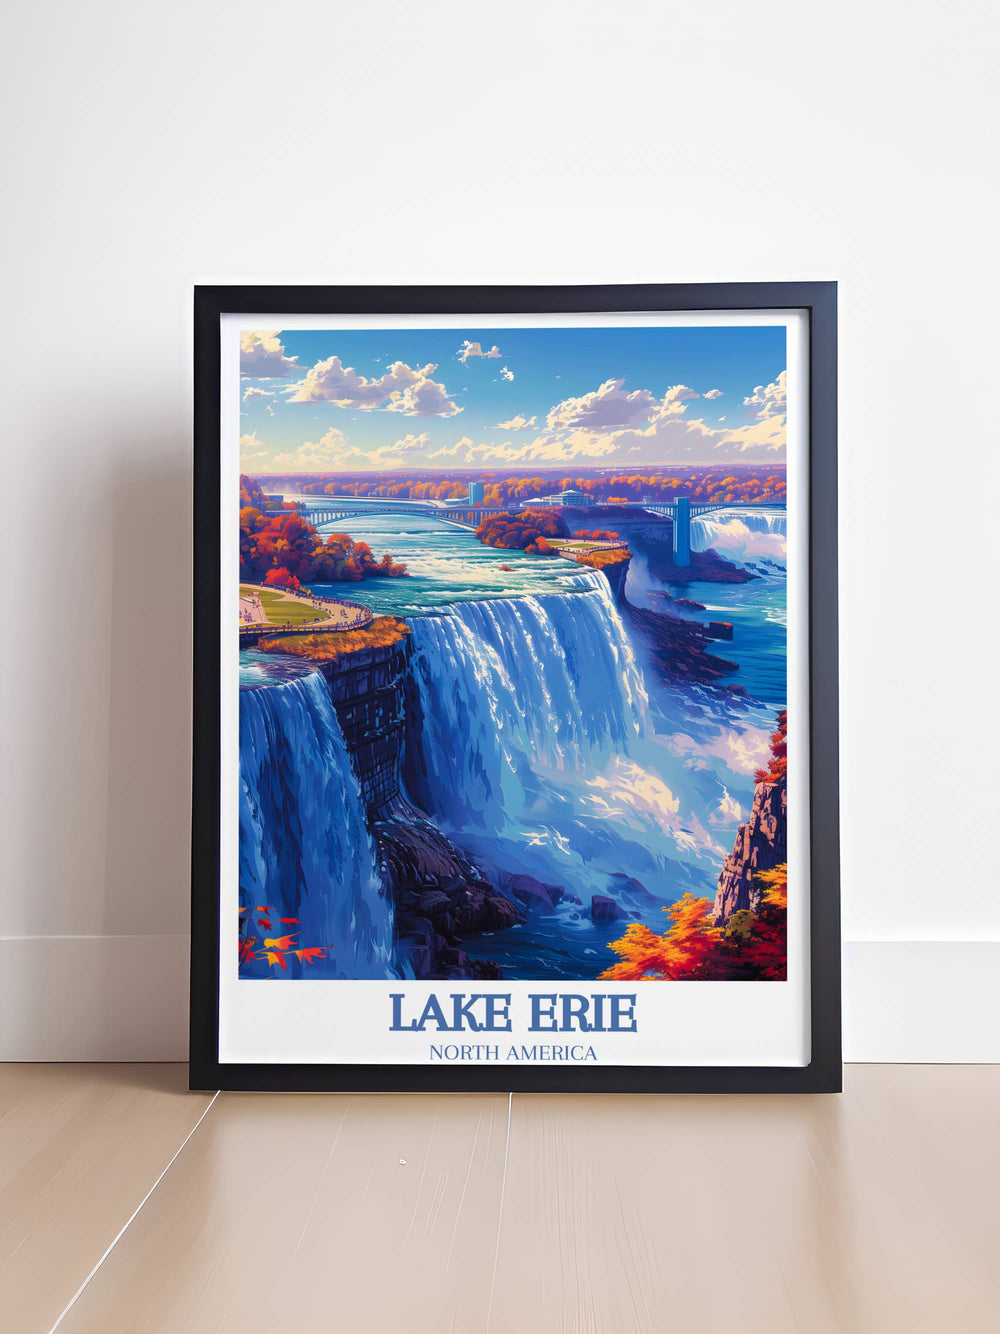 Scenic Lake Erie Print Artwork featuring a tranquil sunset over the lake, with soft orange hues perfect for adding warmth and serenity to any room.